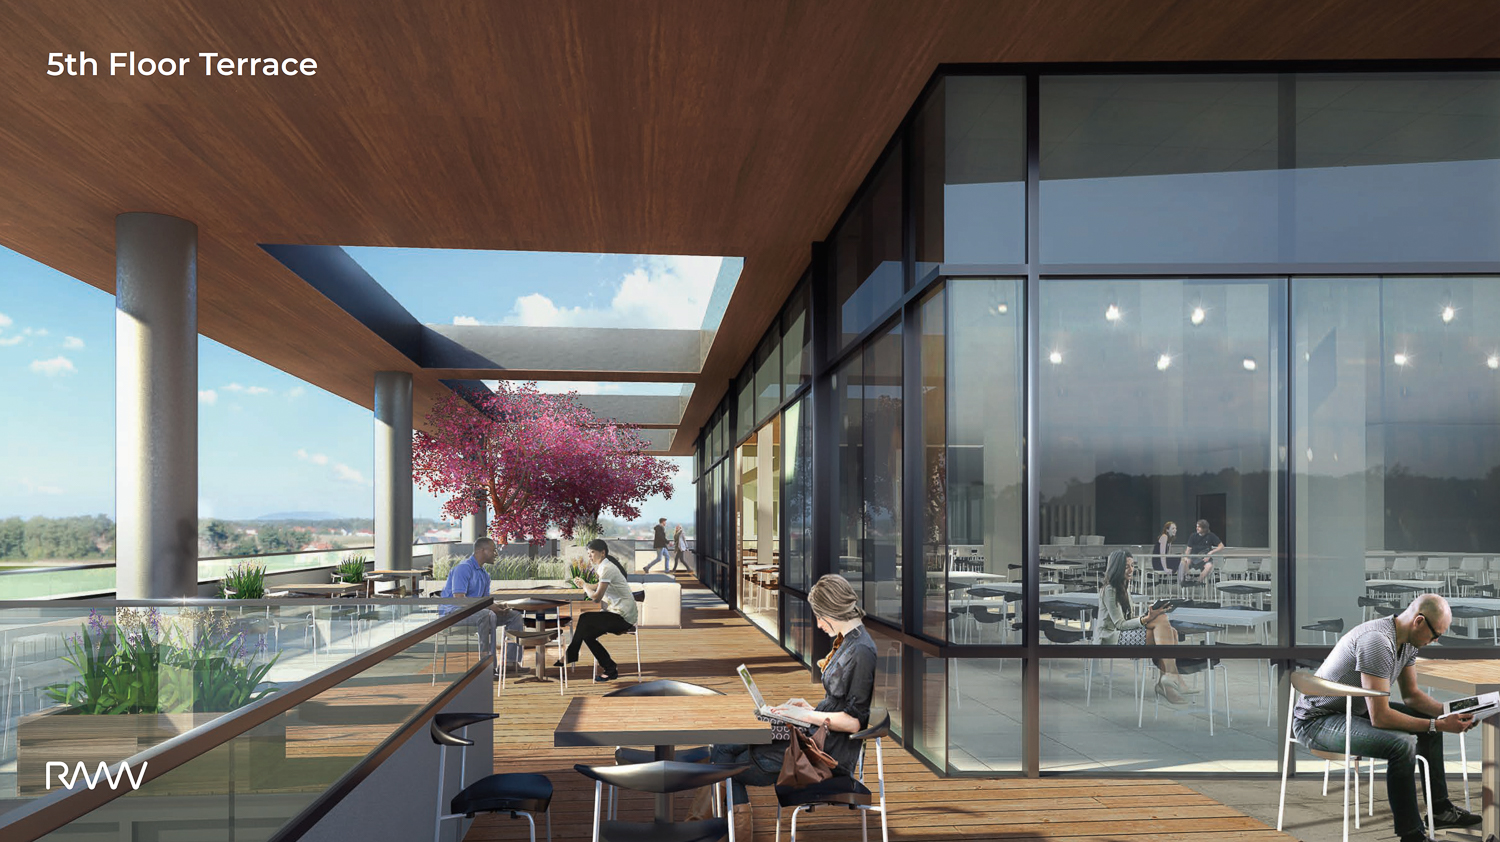 3655 Kifer Street top-floor terrace, rendering by RMW Architecture and Interiors